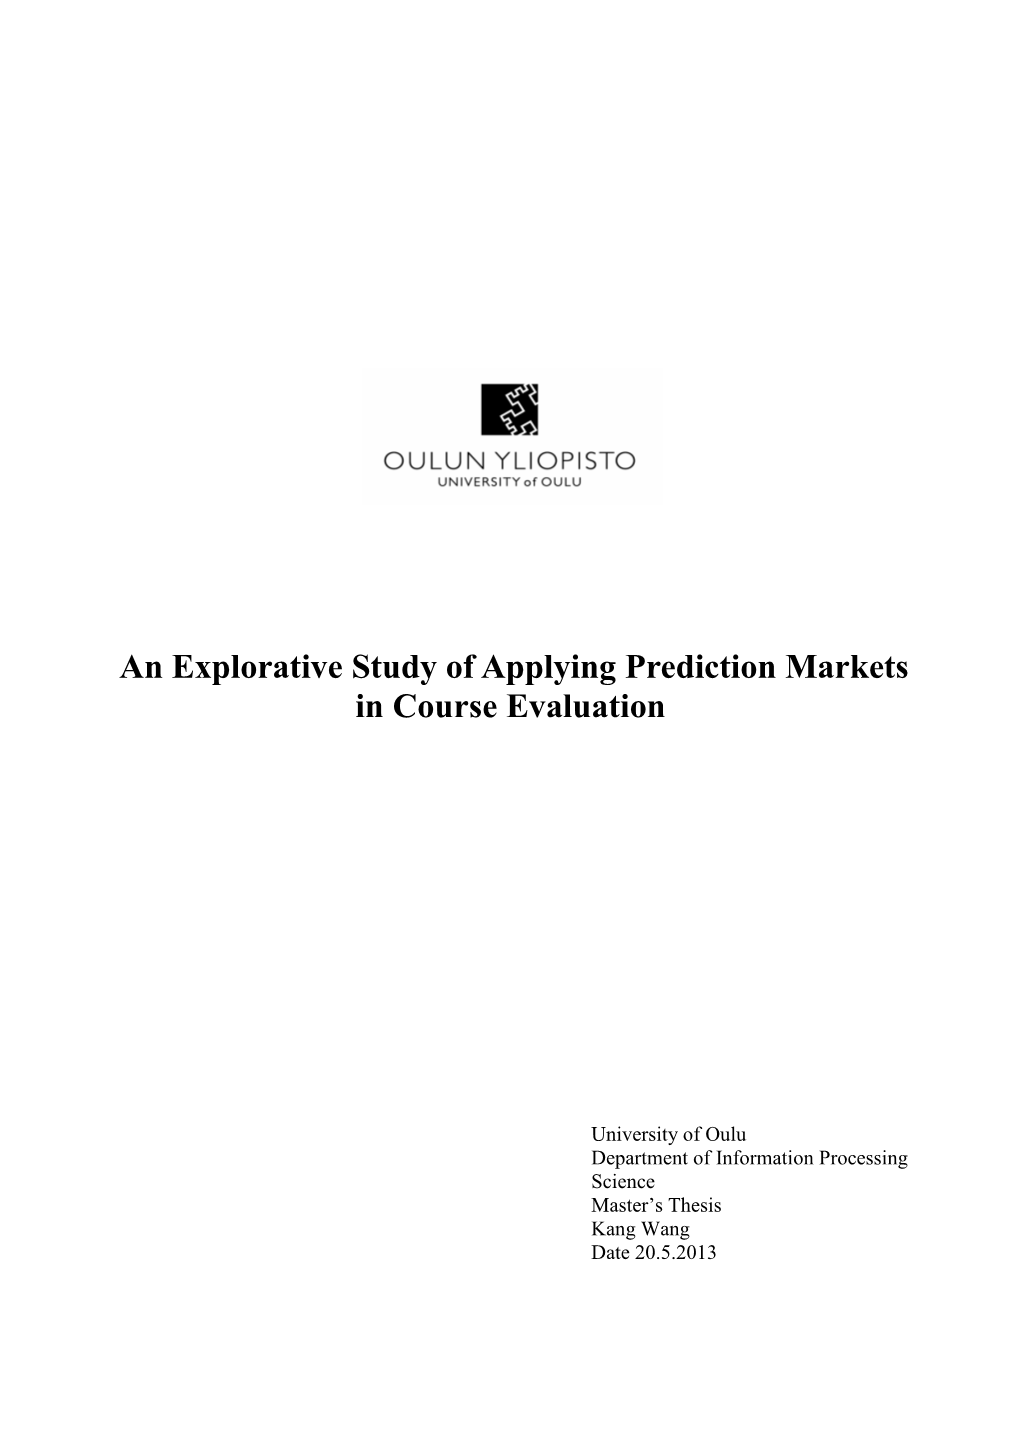 An Explorative Study of Applying Prediction Markets in Course Evaluation